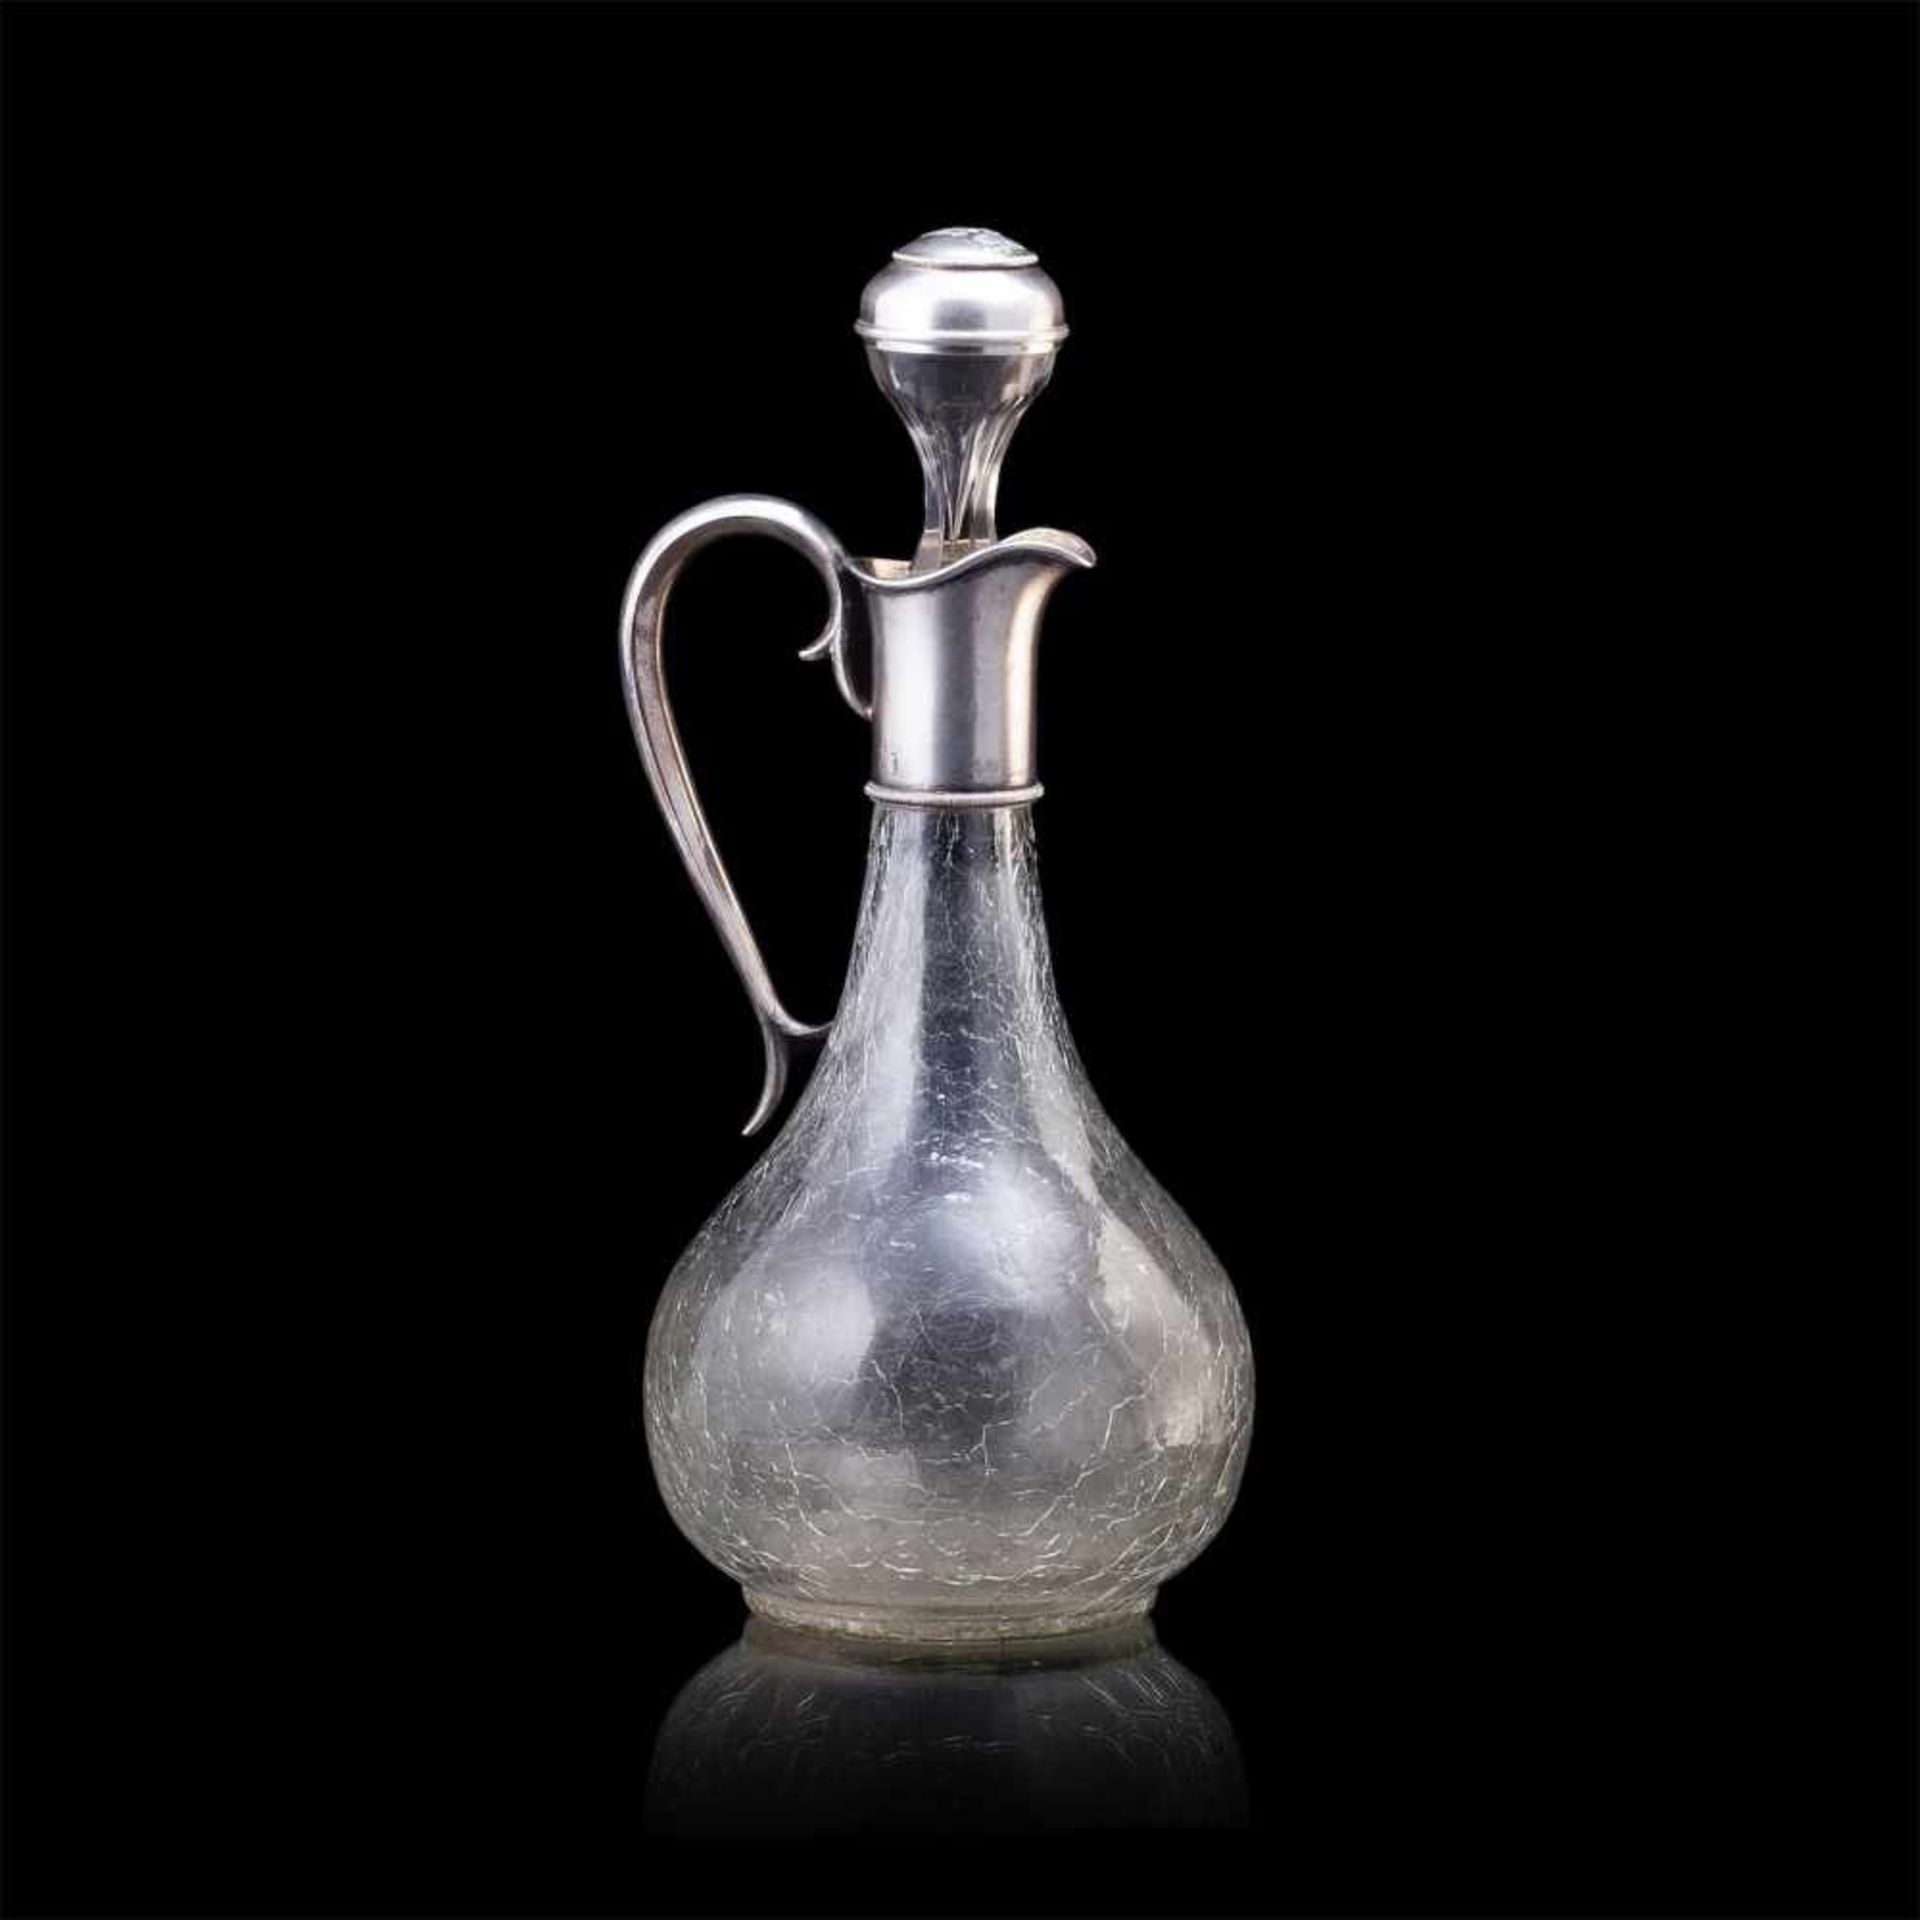 A Faberge silver-gilt and cut-glass carafeA Faberge silver-gilt and cut-glass (crackle decor) carafe